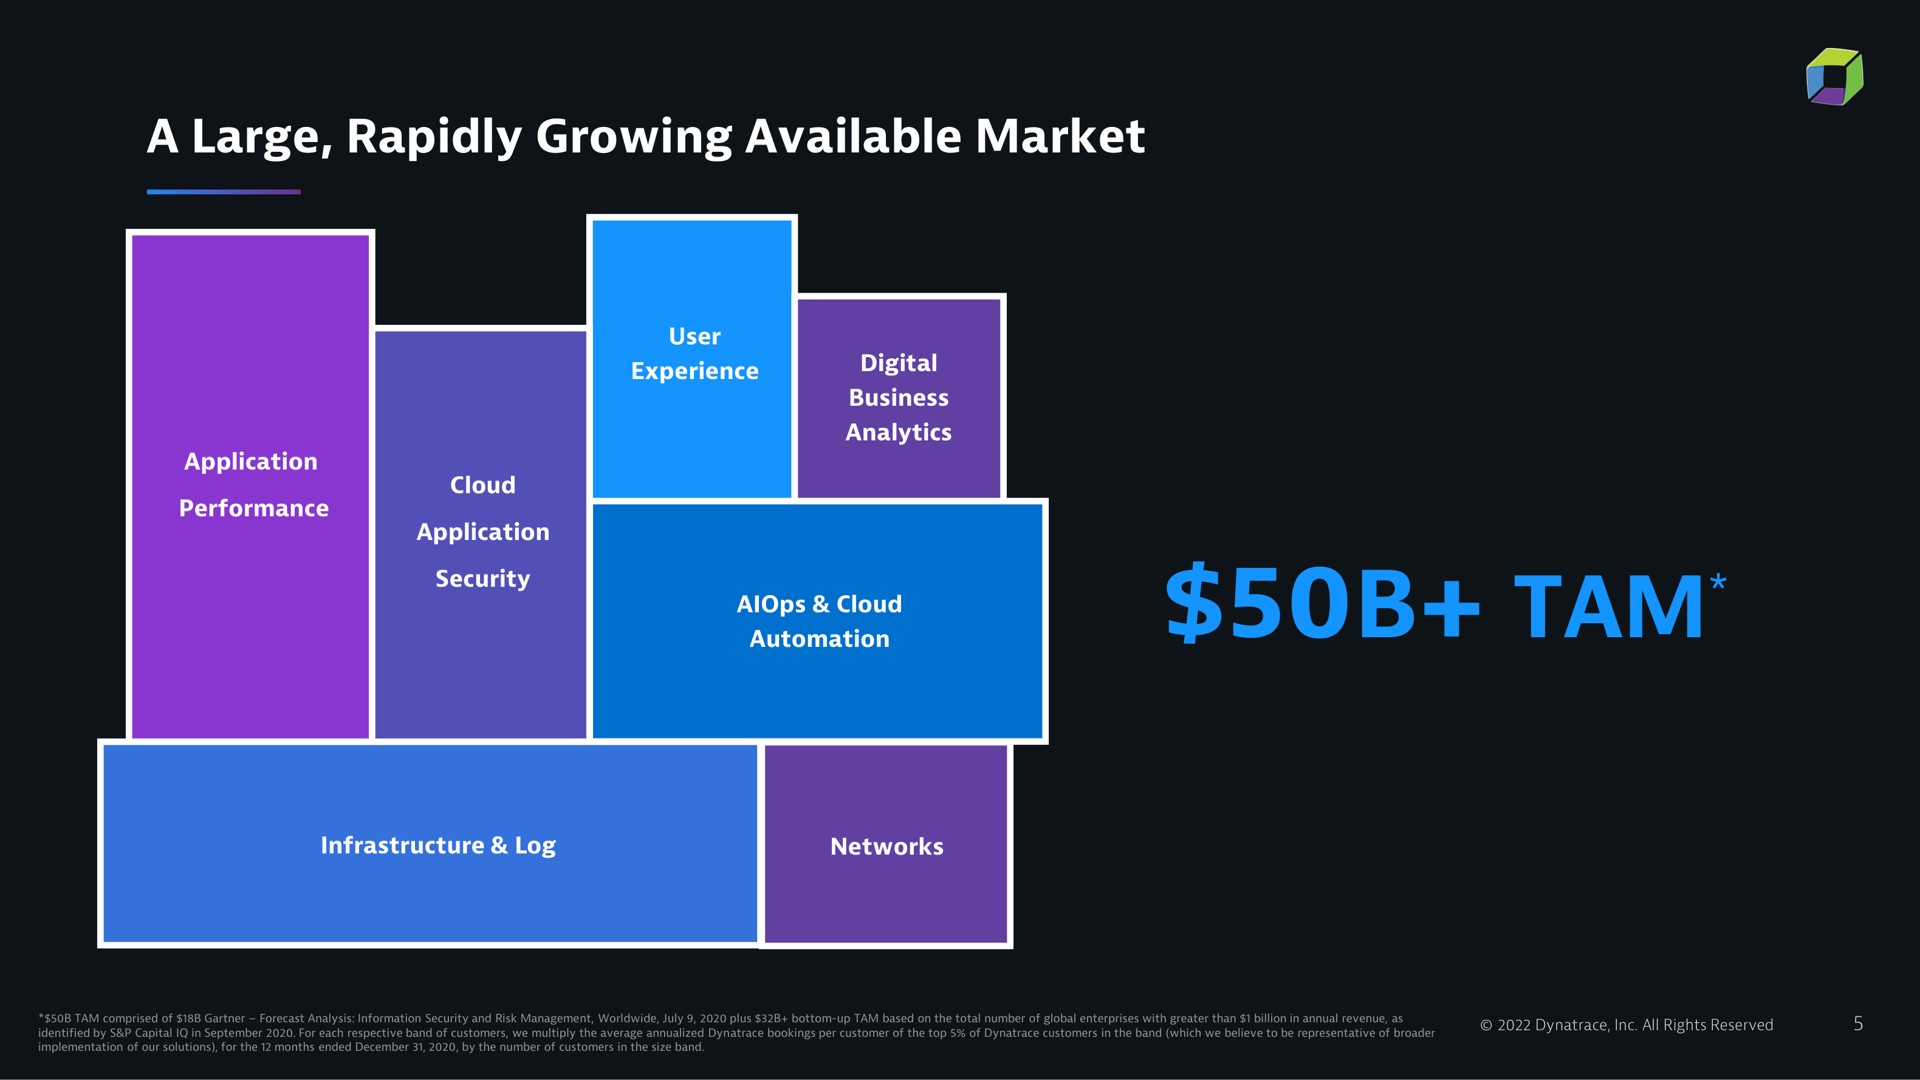 a large rapidly growing available market tam | Dynatrace